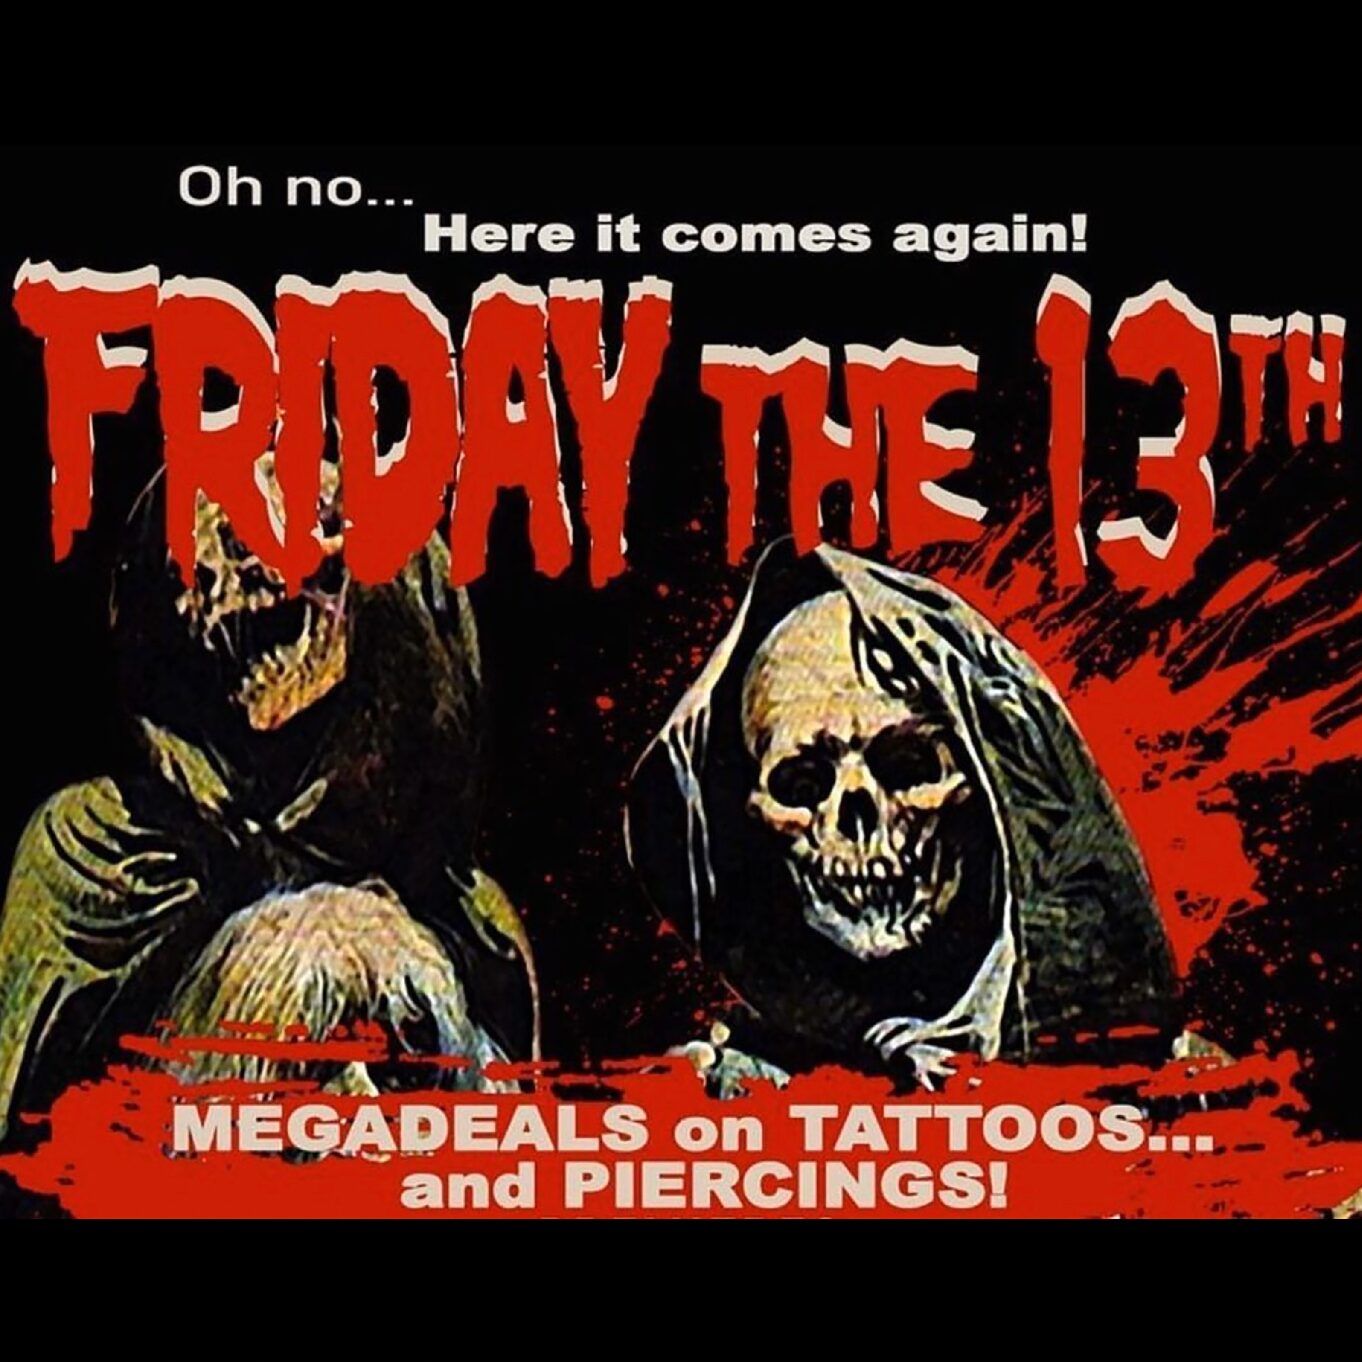 Friday the 13th Deals You Don’t Want to Miss at Lone Star Tattoo!